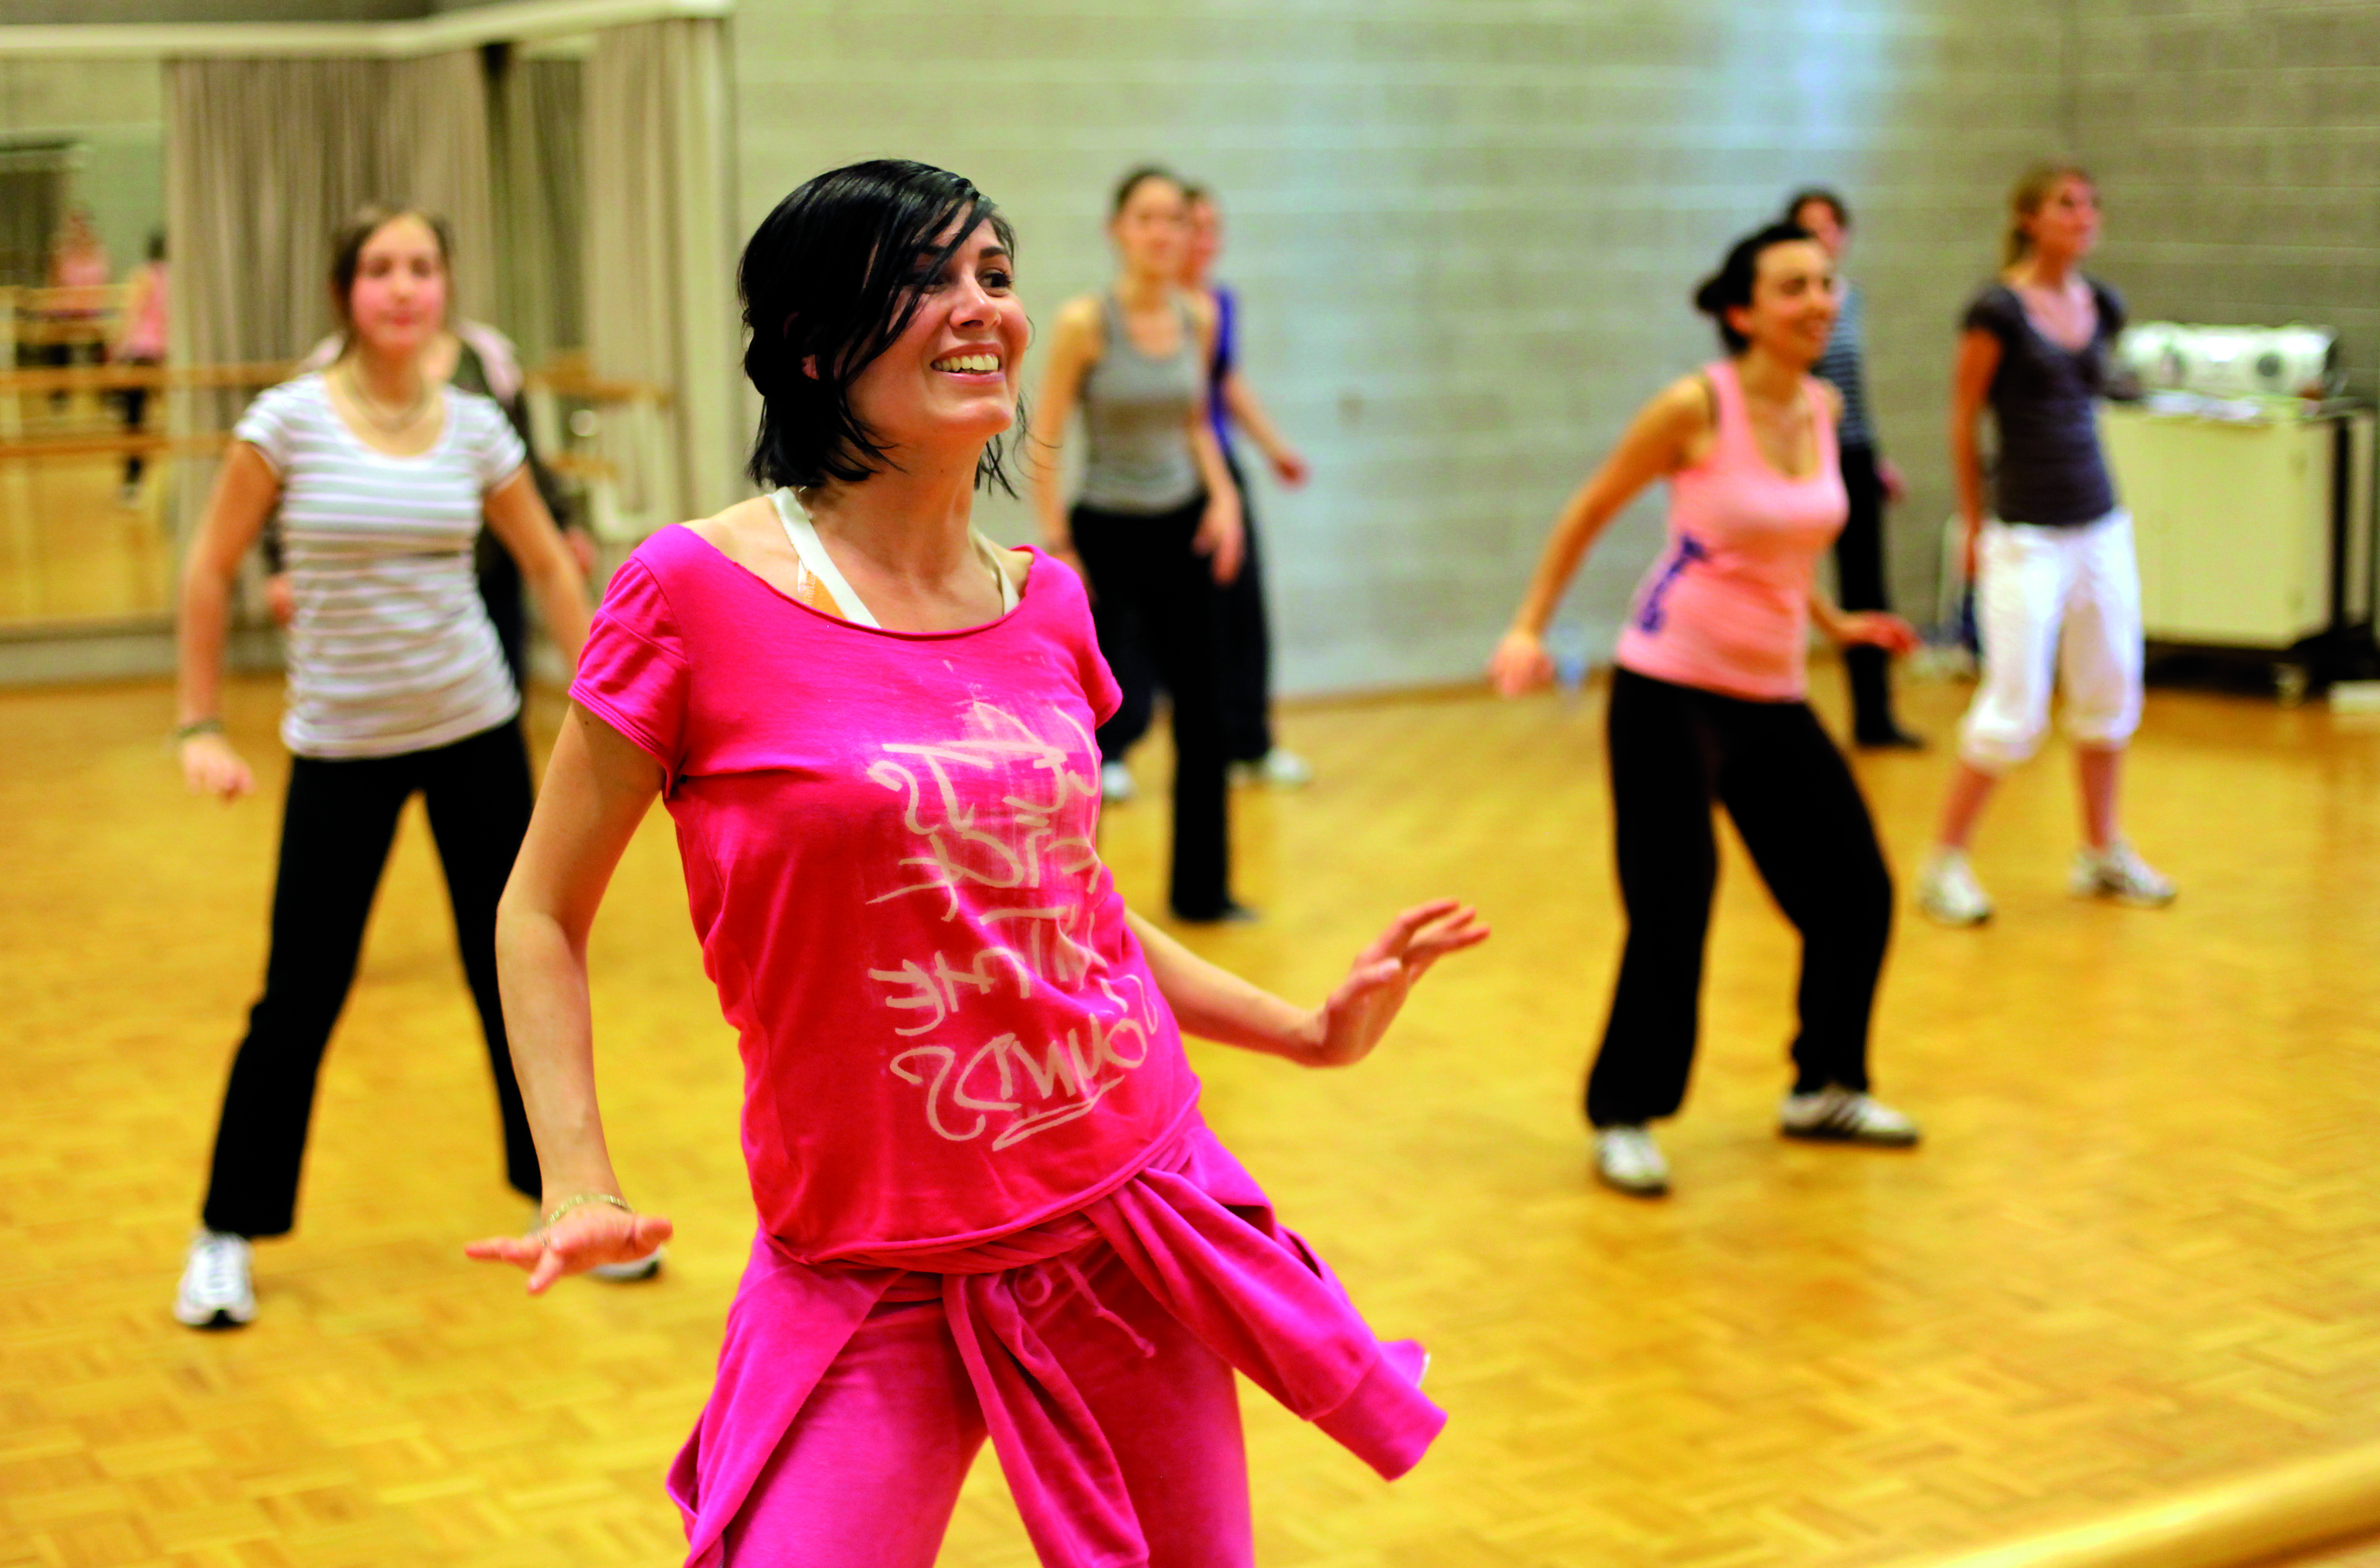 How about Zumba at vhs stuttgart?! Picture credit: Andrea Weise